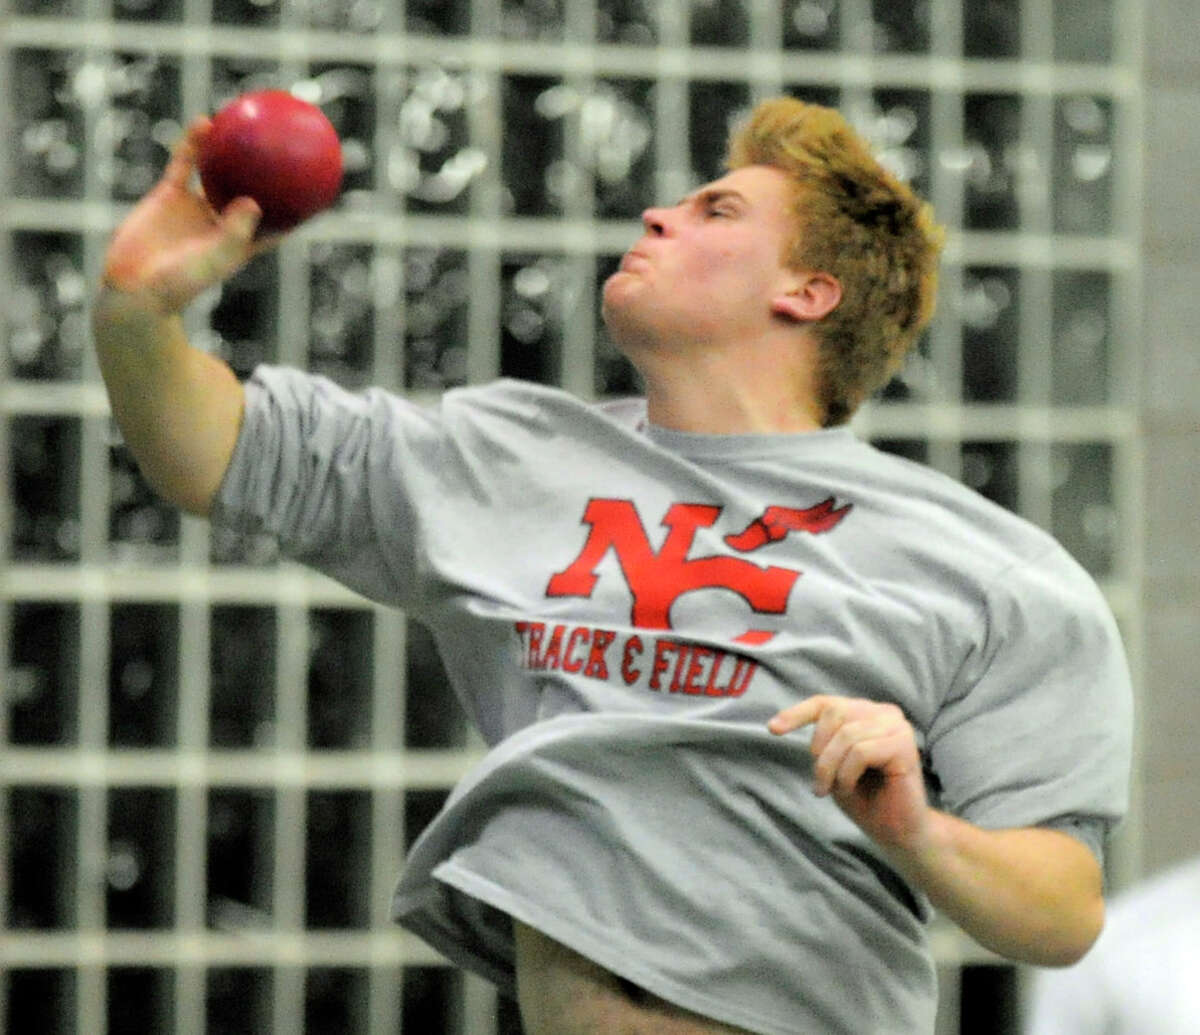 New Canaan's Will Conley competes in the boys shot put event during the FCIAC Boys and Girls Track Championships at the Floyd Little Athletic Center in New Haven, Conn. on Feb. 4, 2016.